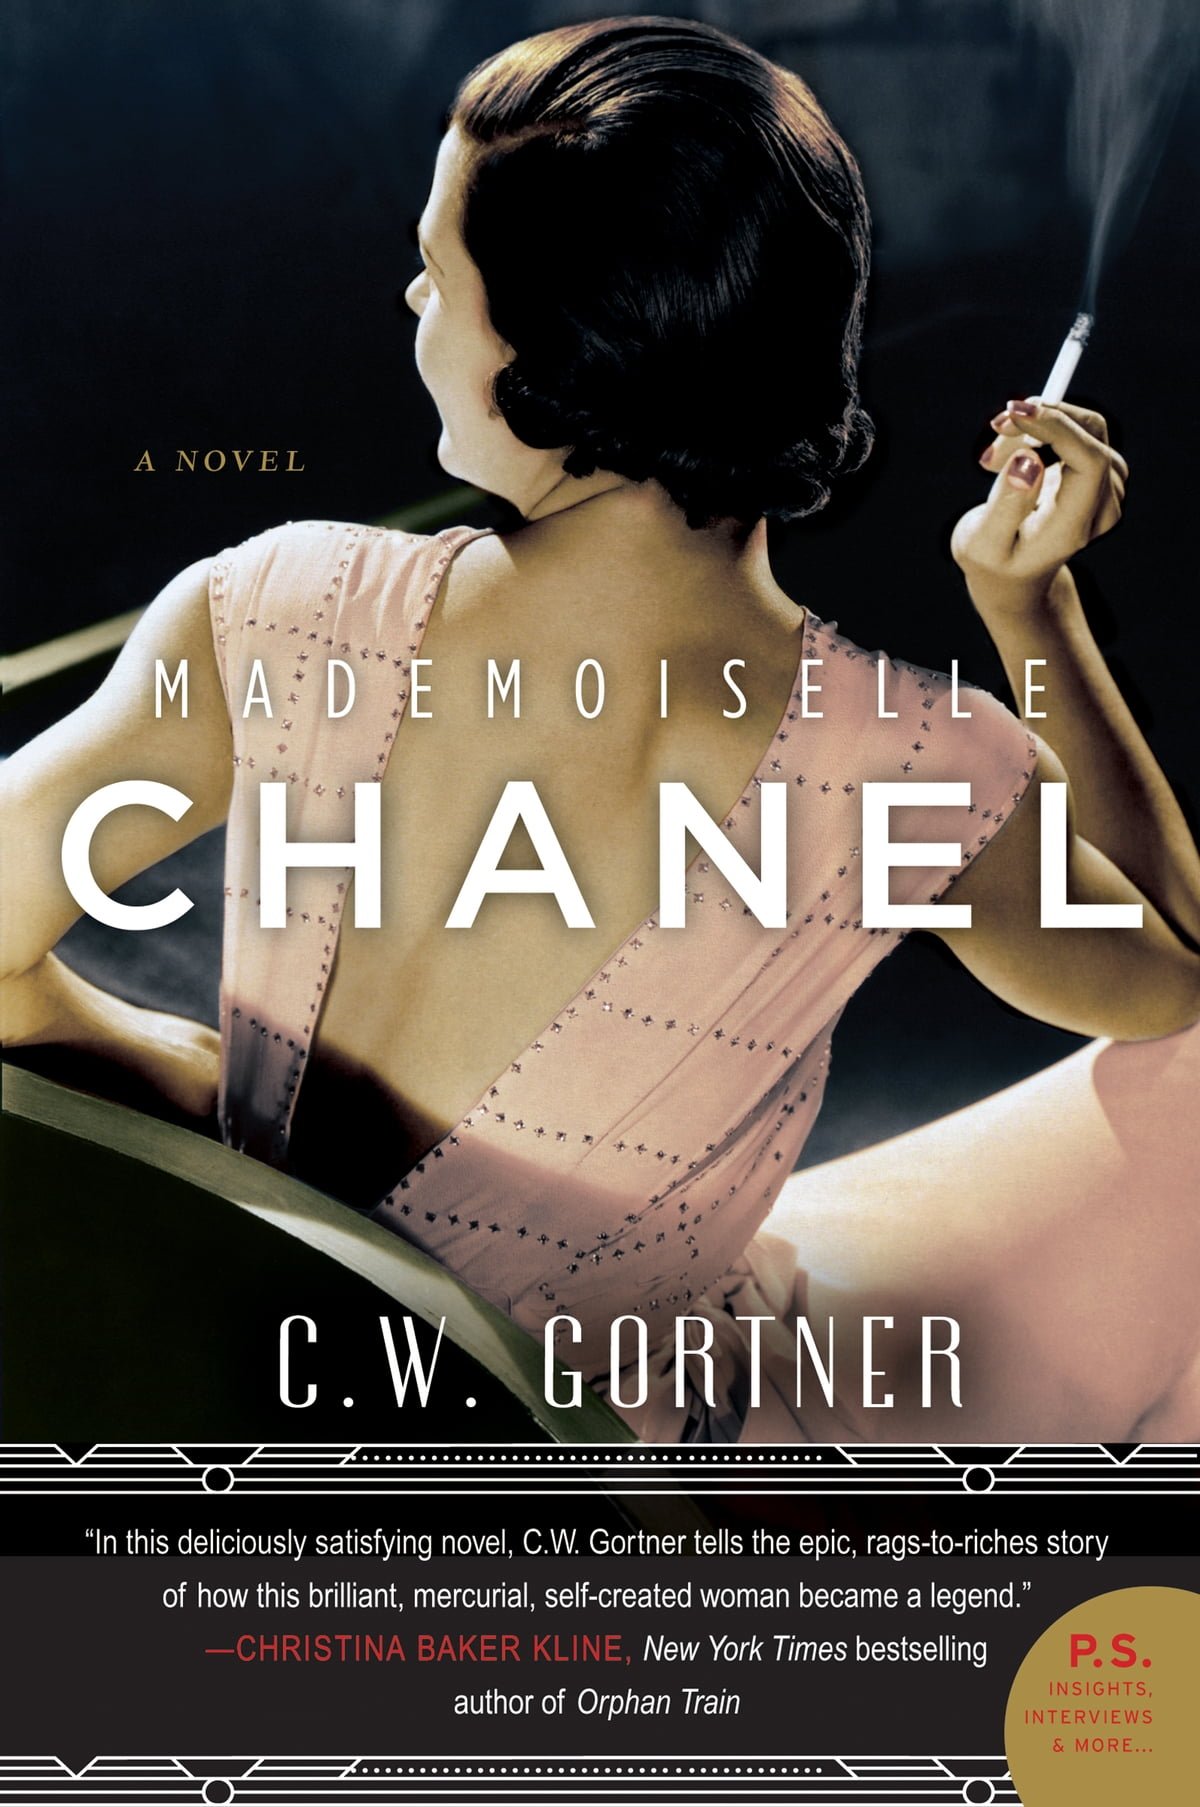 5 Books About Coco Chanel